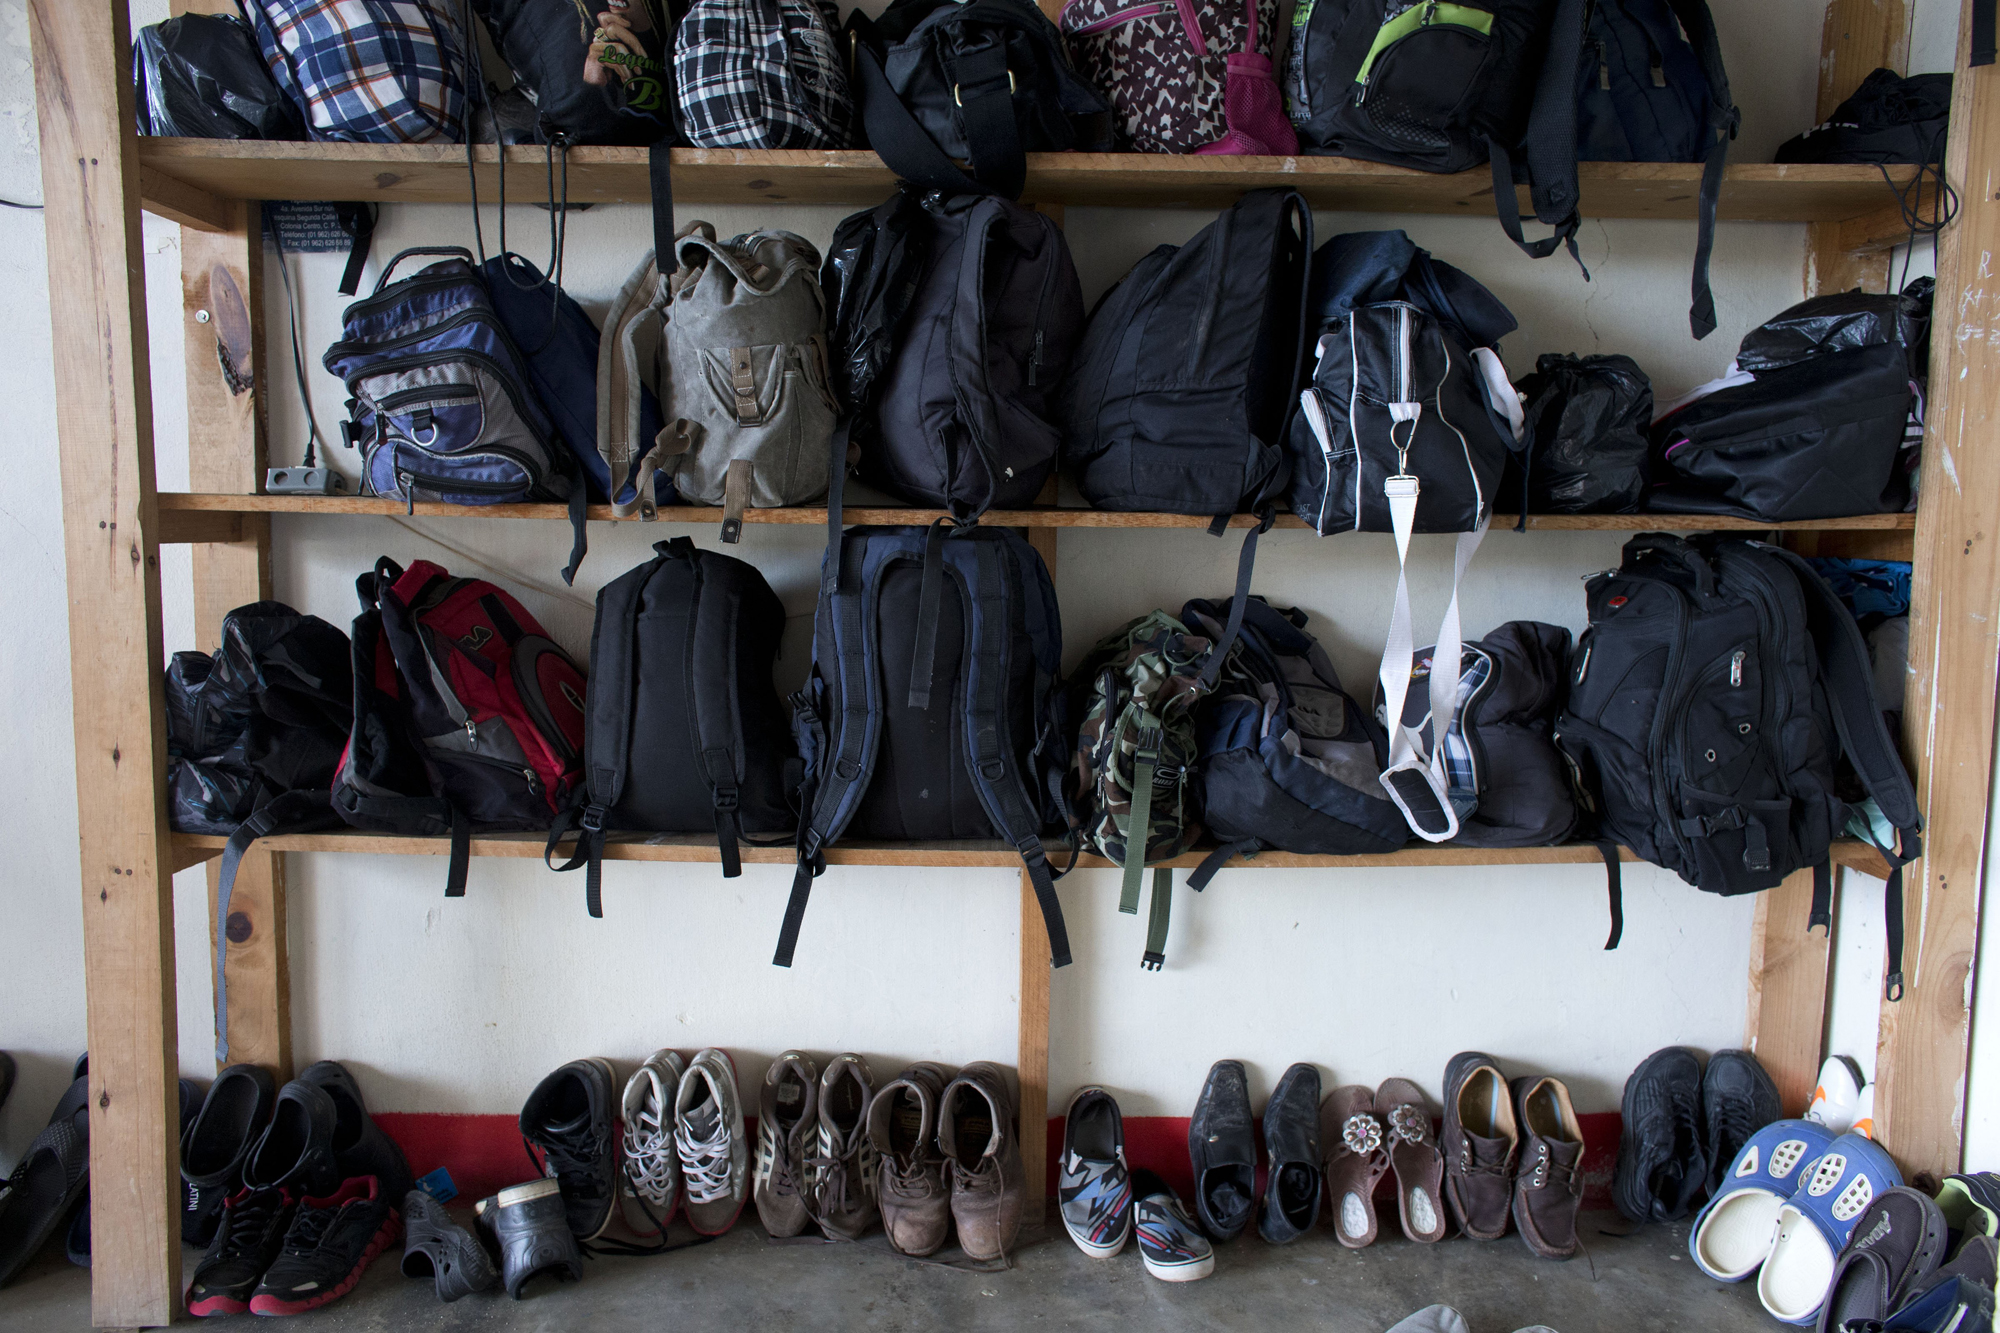 Migrants' bags and shoes line the edge of the room in the men's section of a shelter providing temporary refuge to Central Americans traveling north toward the U.S., in Arriaga, Chiapas State, Mexico, June 18.